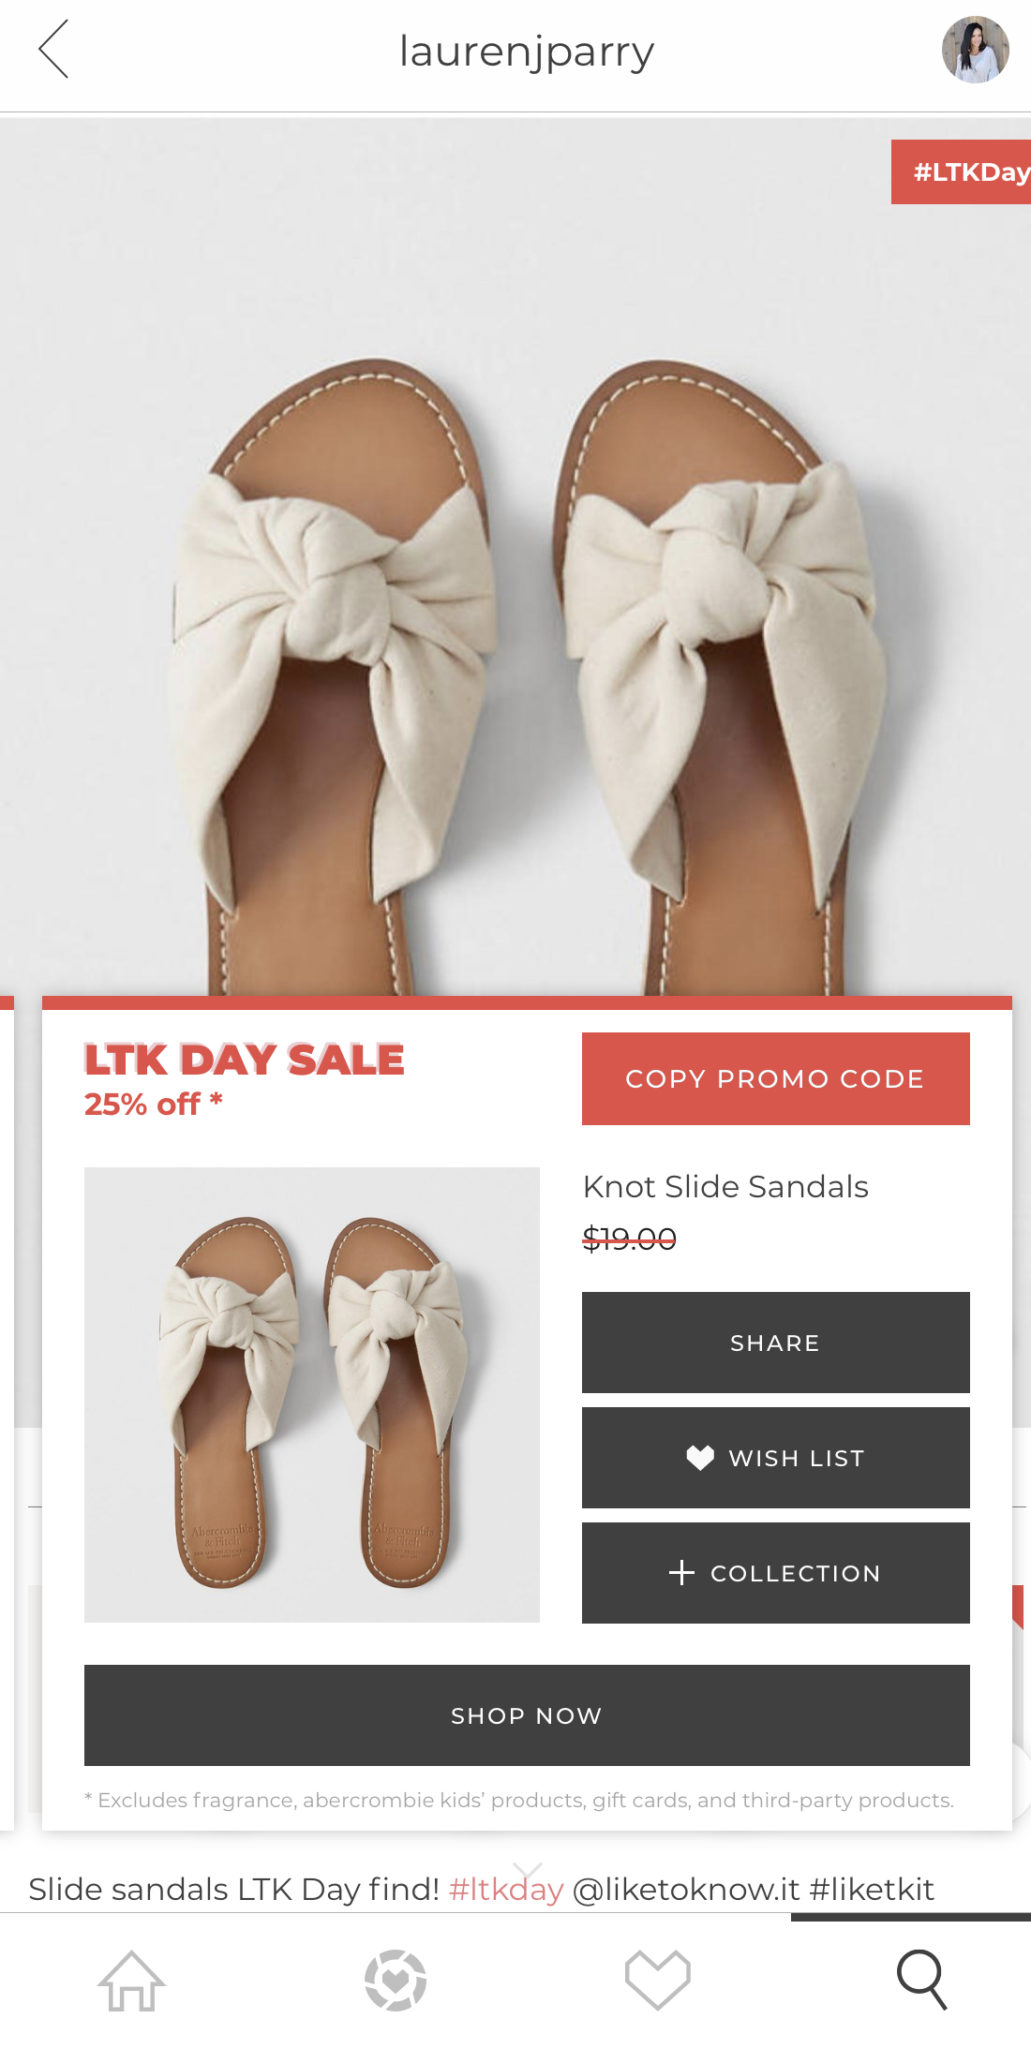 LTK Day Shopping Guide: The Best Sales and Top Picks featured by top US fashion blog, Outfits & Outings: image of knot slide sandals on sale